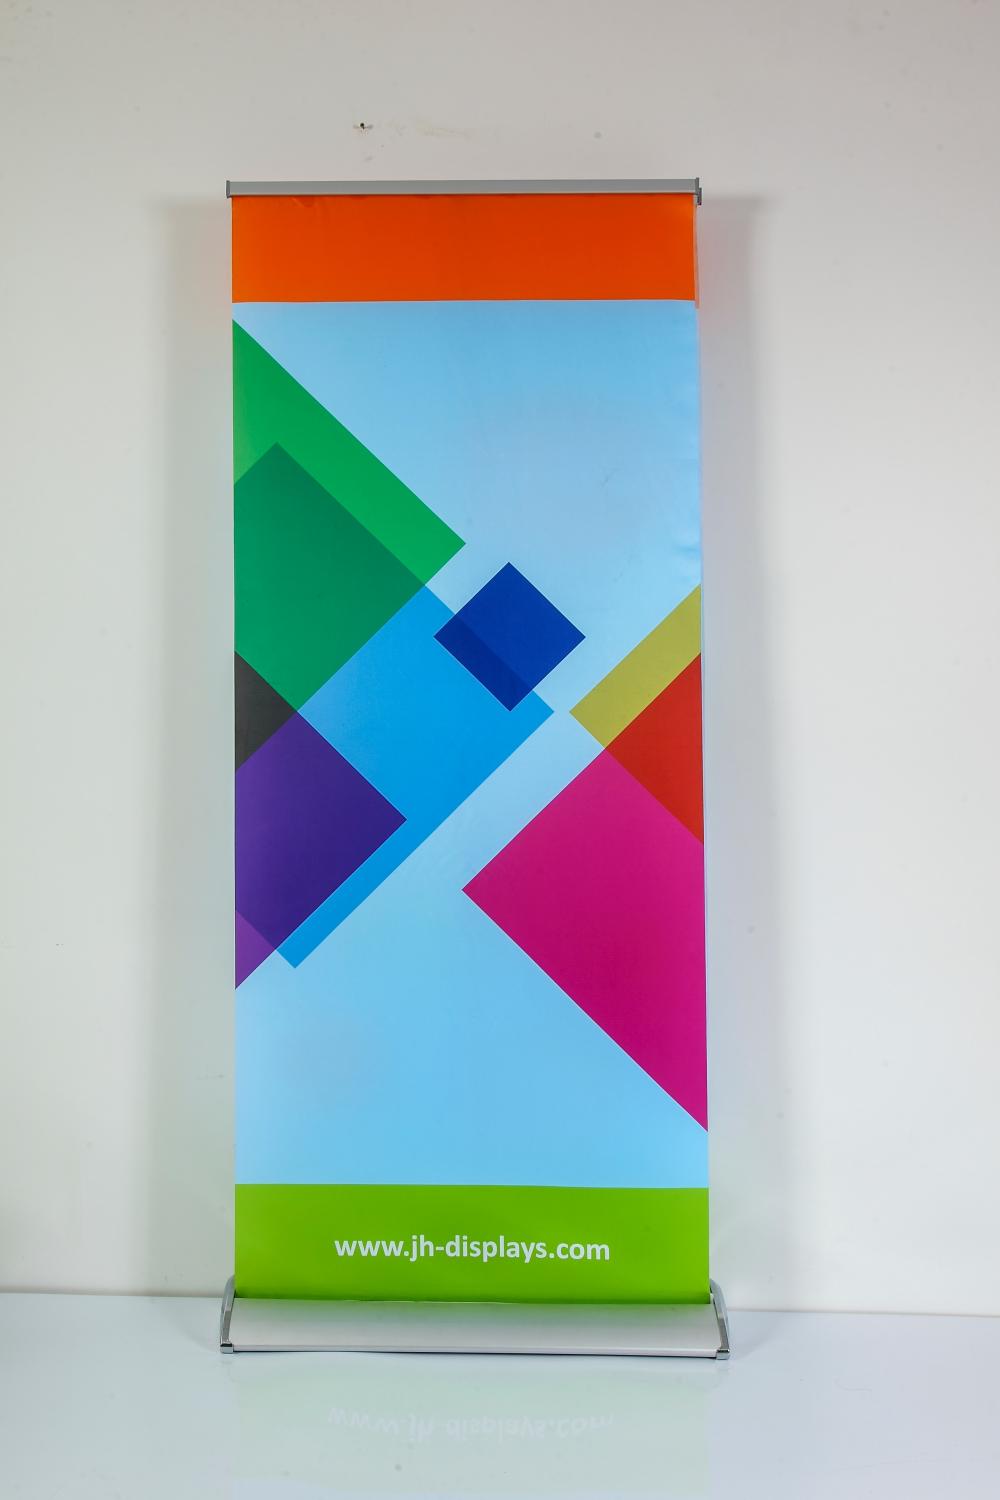 Luxury Wide base roll up banner stand